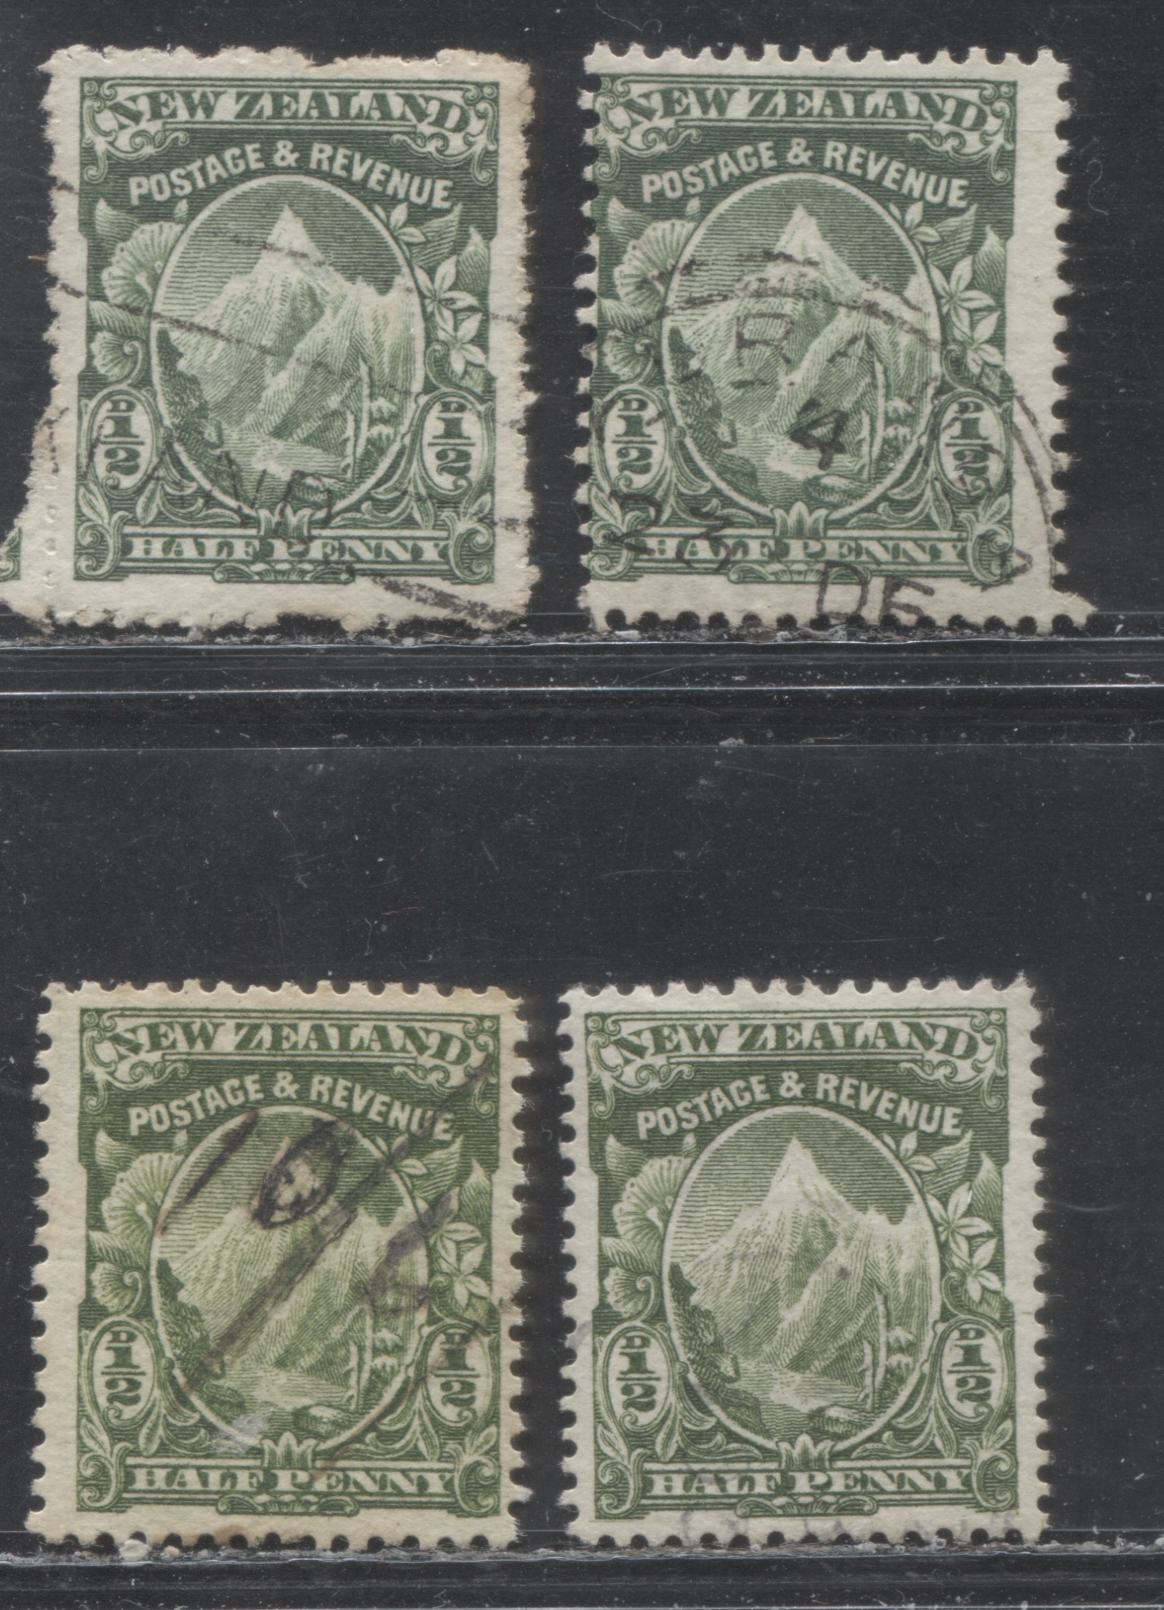 Lot 269 New Zealand SG#374, 377, 377a 1/2d  Green  King Edward VII, 1907-1908 Waterlow Pictorial Definitive Issue, 4 Fine & VF Used Singles, Single Watermark, Cowan Paper, Perf. 14, 14 x 13.25 and 14 x 15